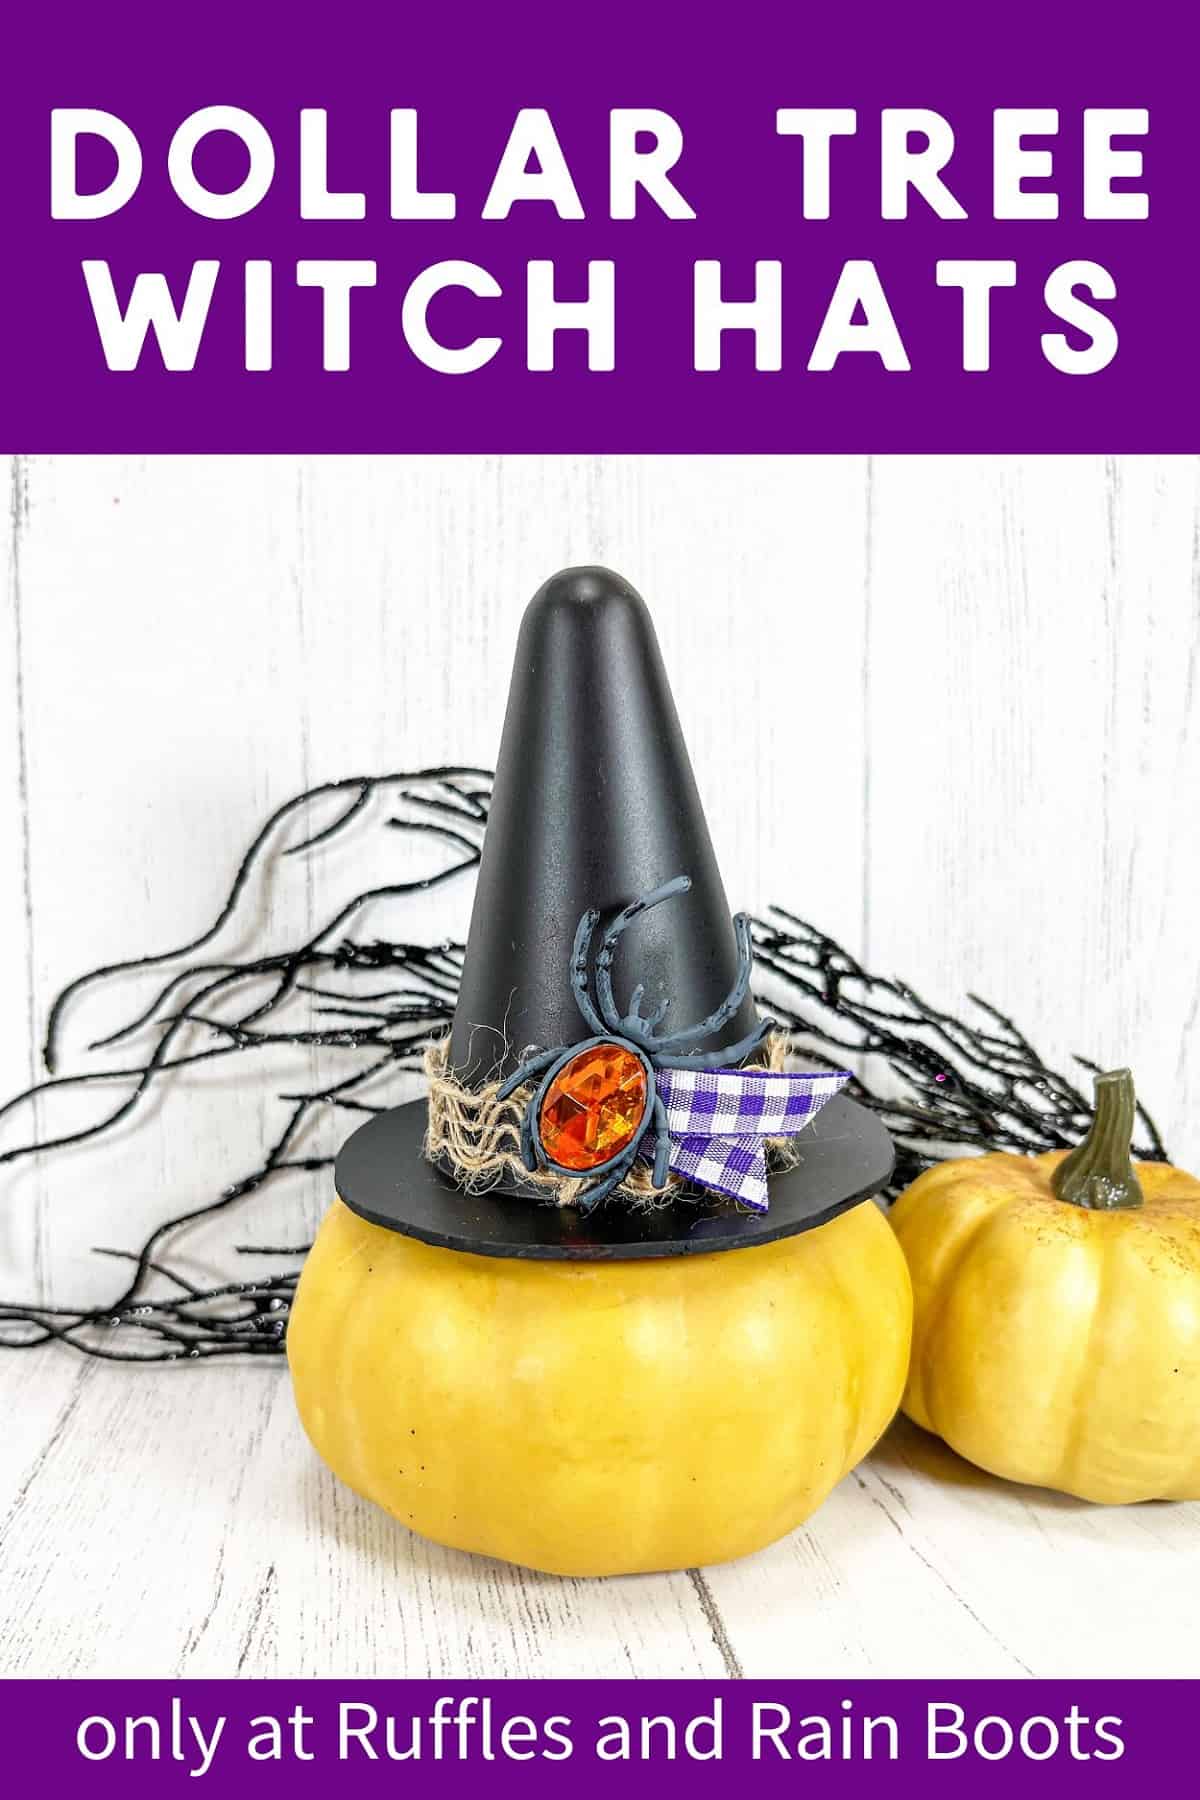 A witch's hat on a yellow gourd, next to a yellow gourd against a white weathered wood background.